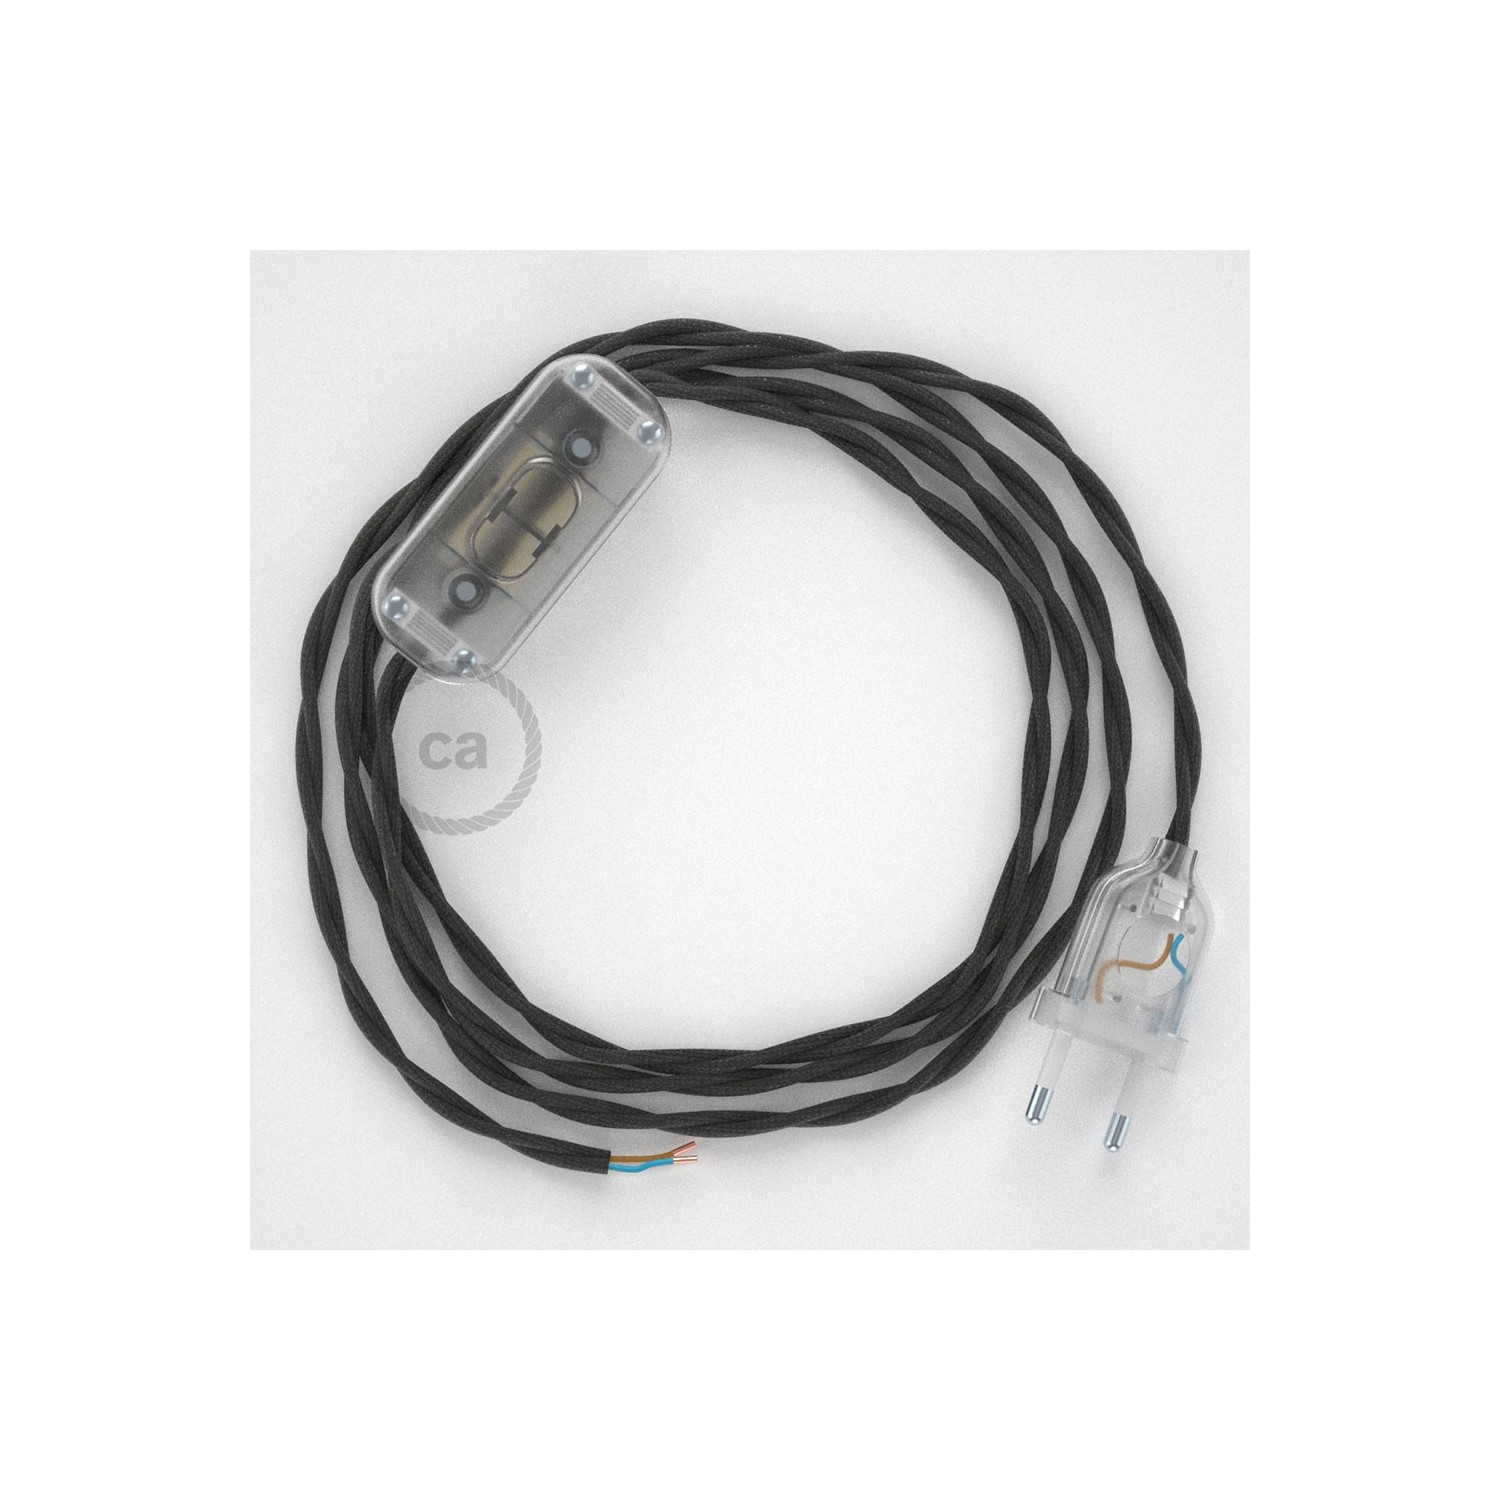 Lamp wiring, TM26 Dark Grey Rayon 1,80 m. Choose the colour of the switch and plug.